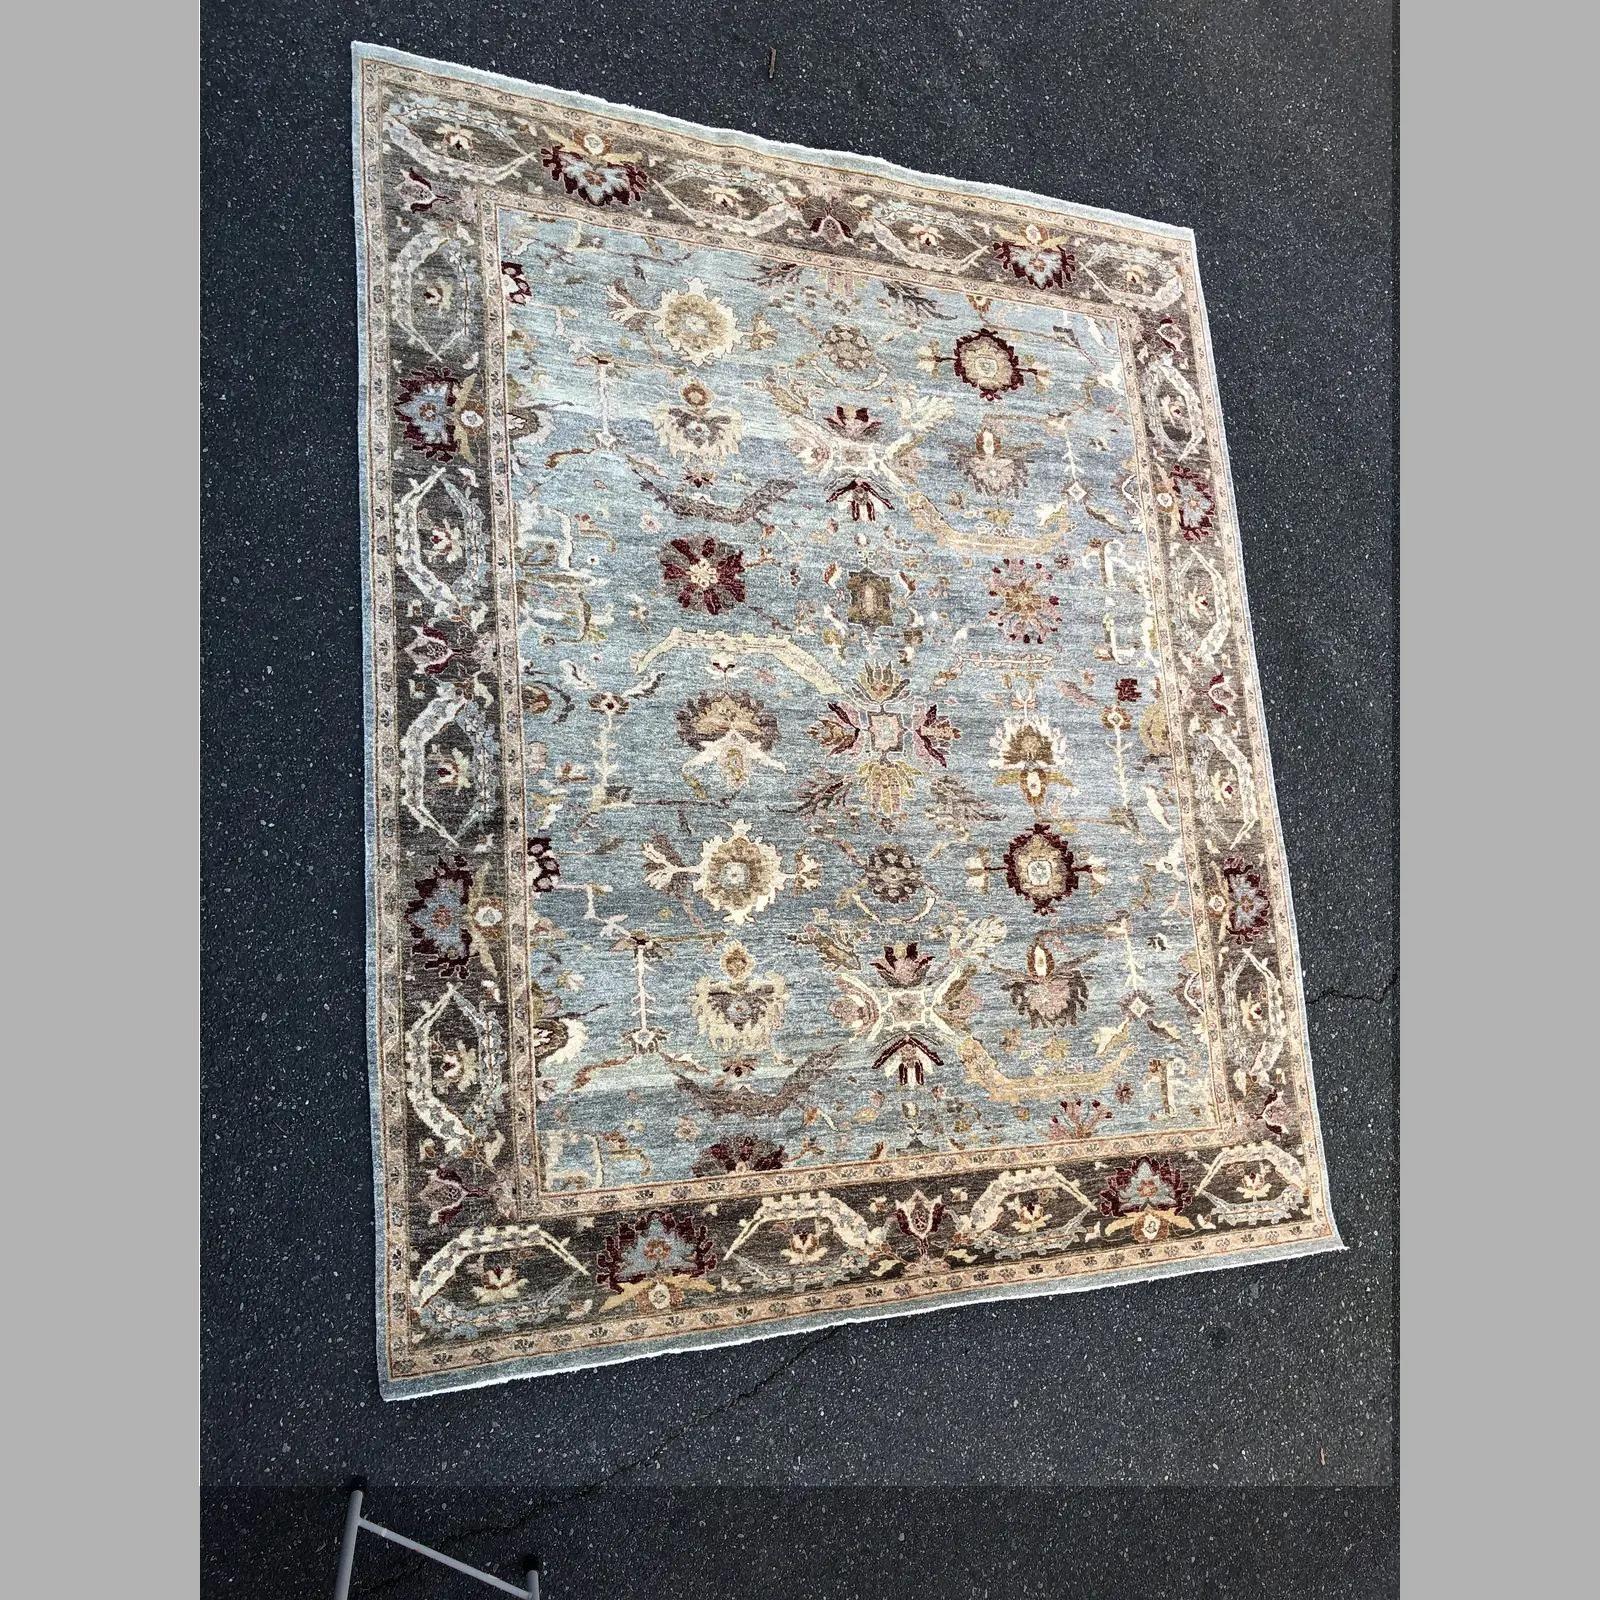 Contemporary Turkish Oushak wool woven rug with a stunning botanical print design. Vibrant blend/ombre of light blues in the center with sand colored perimeter and pink/maroon accents throughout. Hand-knotted, this rug features a lovely blend of